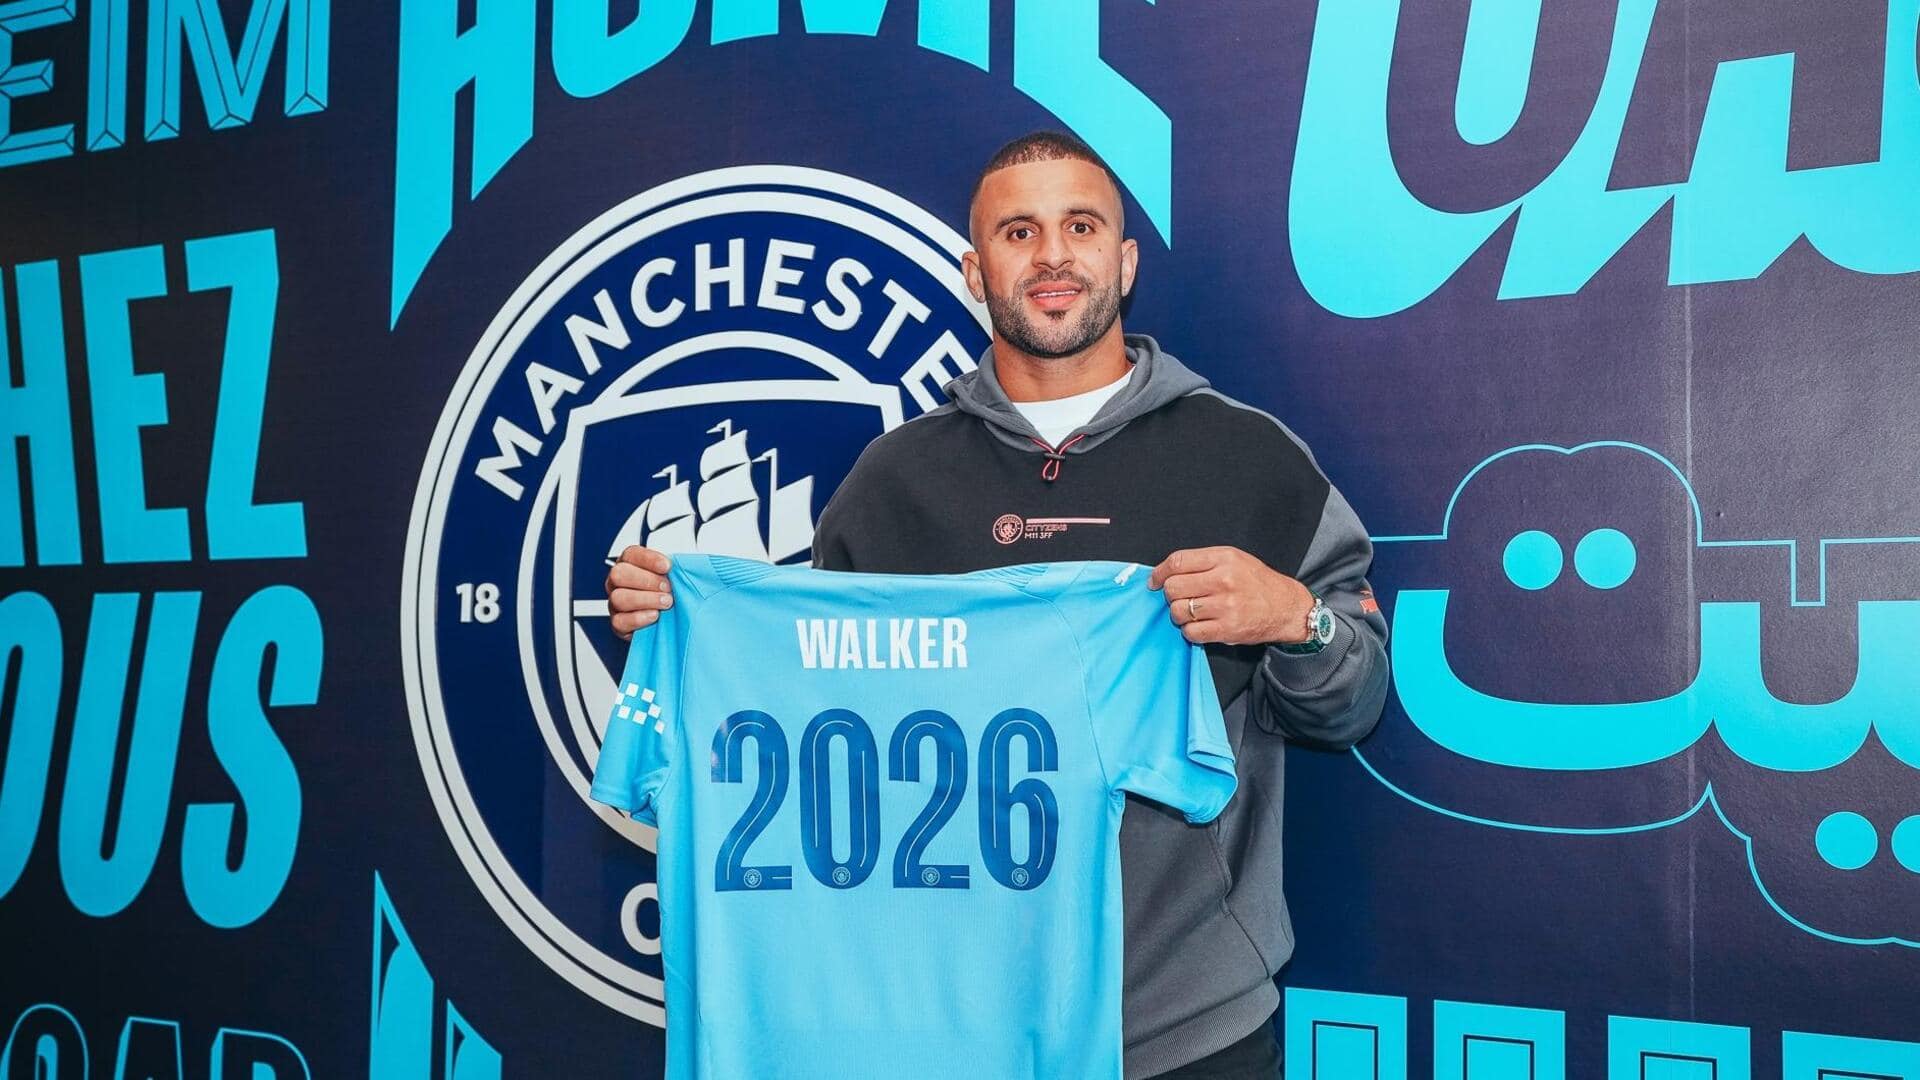 Kyle Walker signs contract extension with Manchester City: Key stats